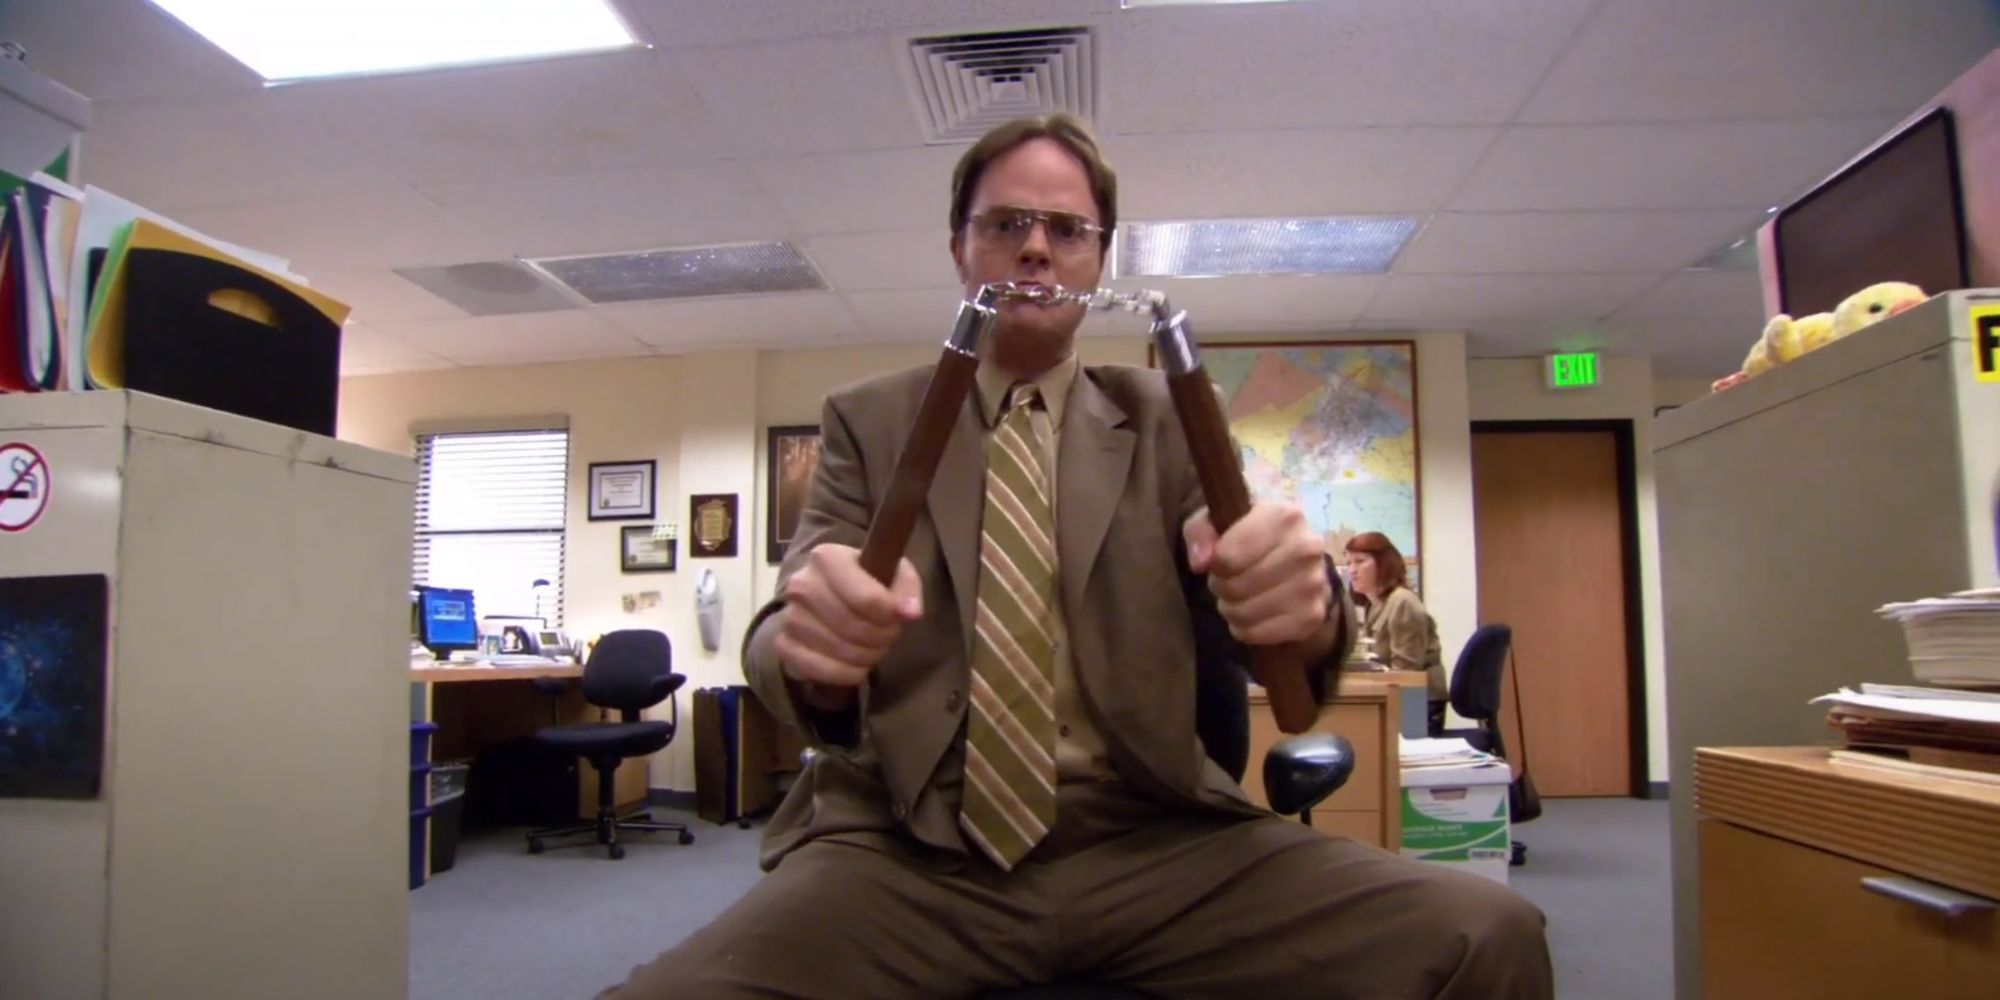 Dwight shows off his weapons hidden around the office in The Office